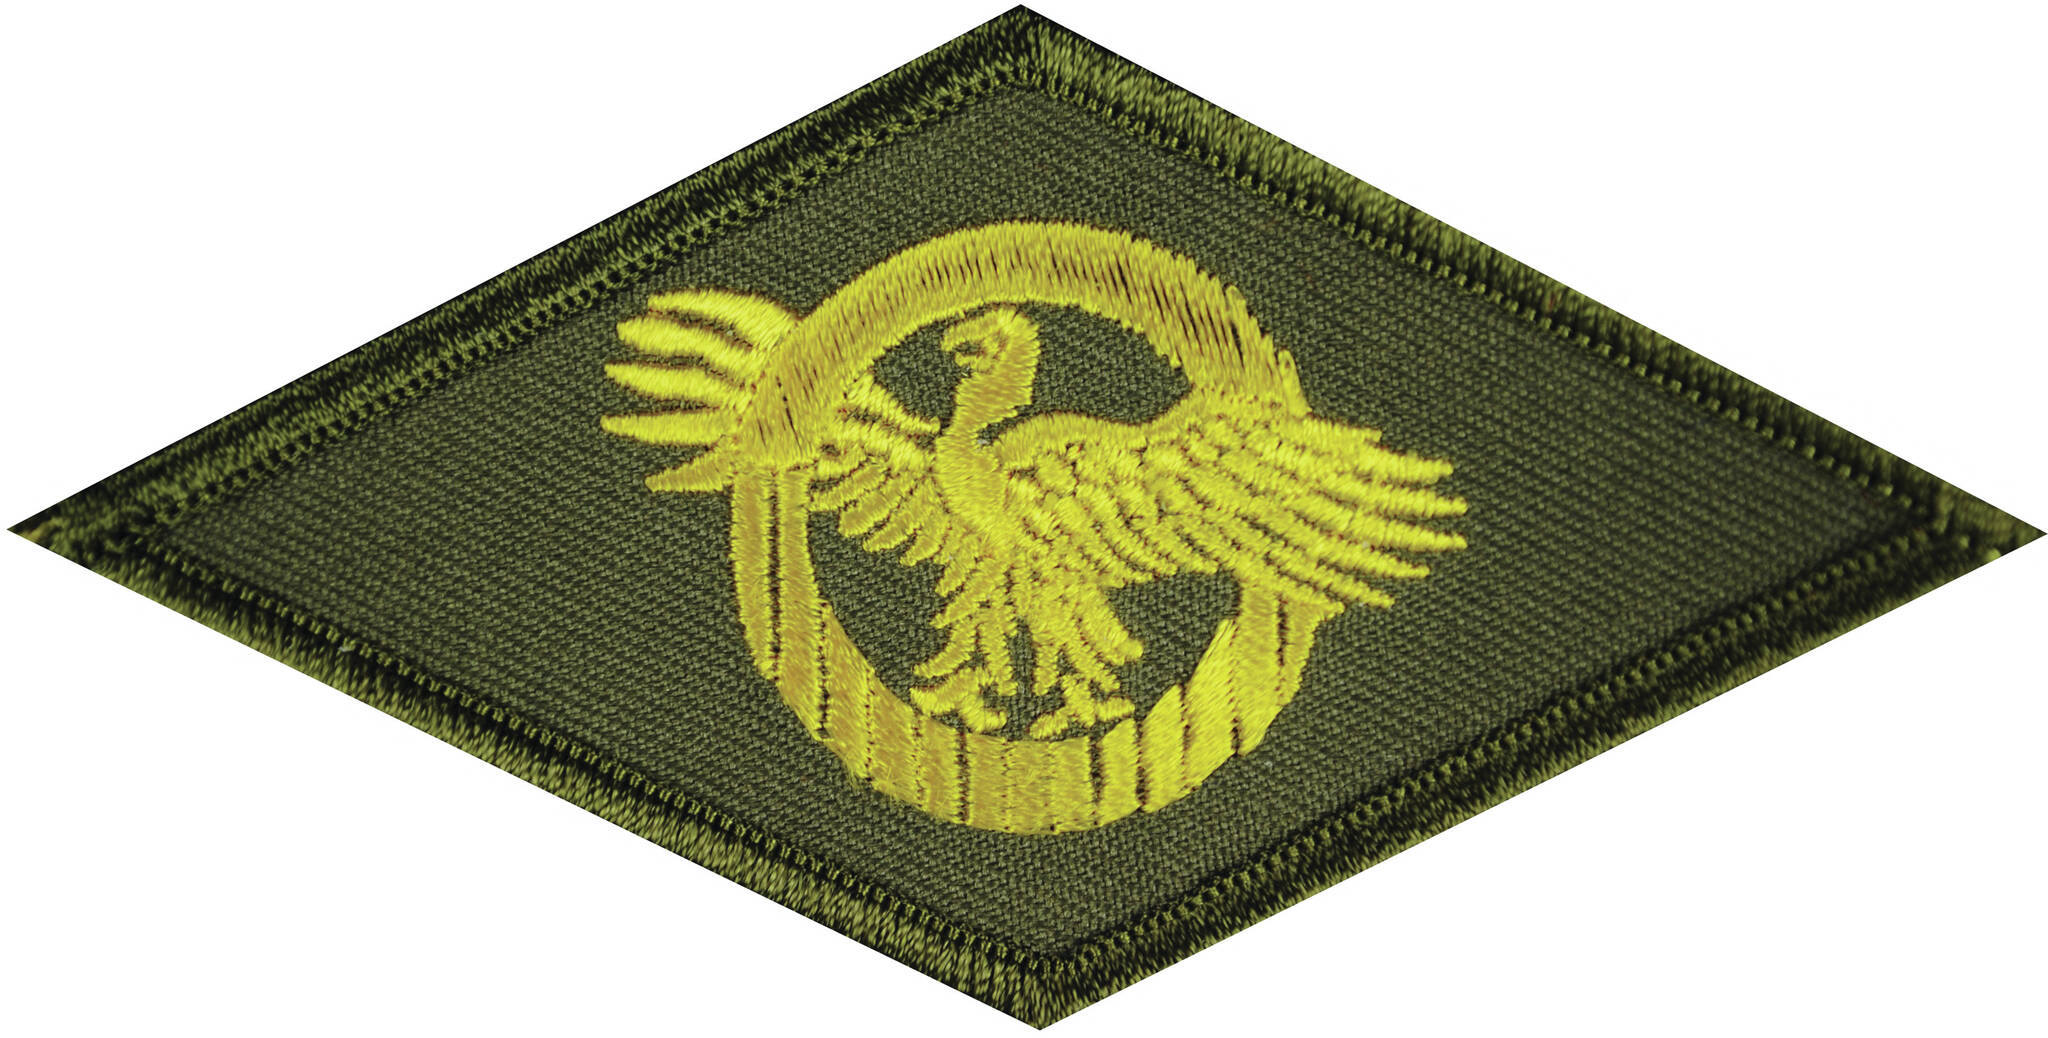 Despite its depiction of an eagle inside a wreath, this “ruptured duck” patch got its nickname because of the bird’s awkward-looking appearance. The proper name for the patch was the Honorable Discharge Emblem, and, during a time of clothing shortages in the United States, it allowed discharged soldiers to wear their uniforms for up to 30 days after leaving the service.